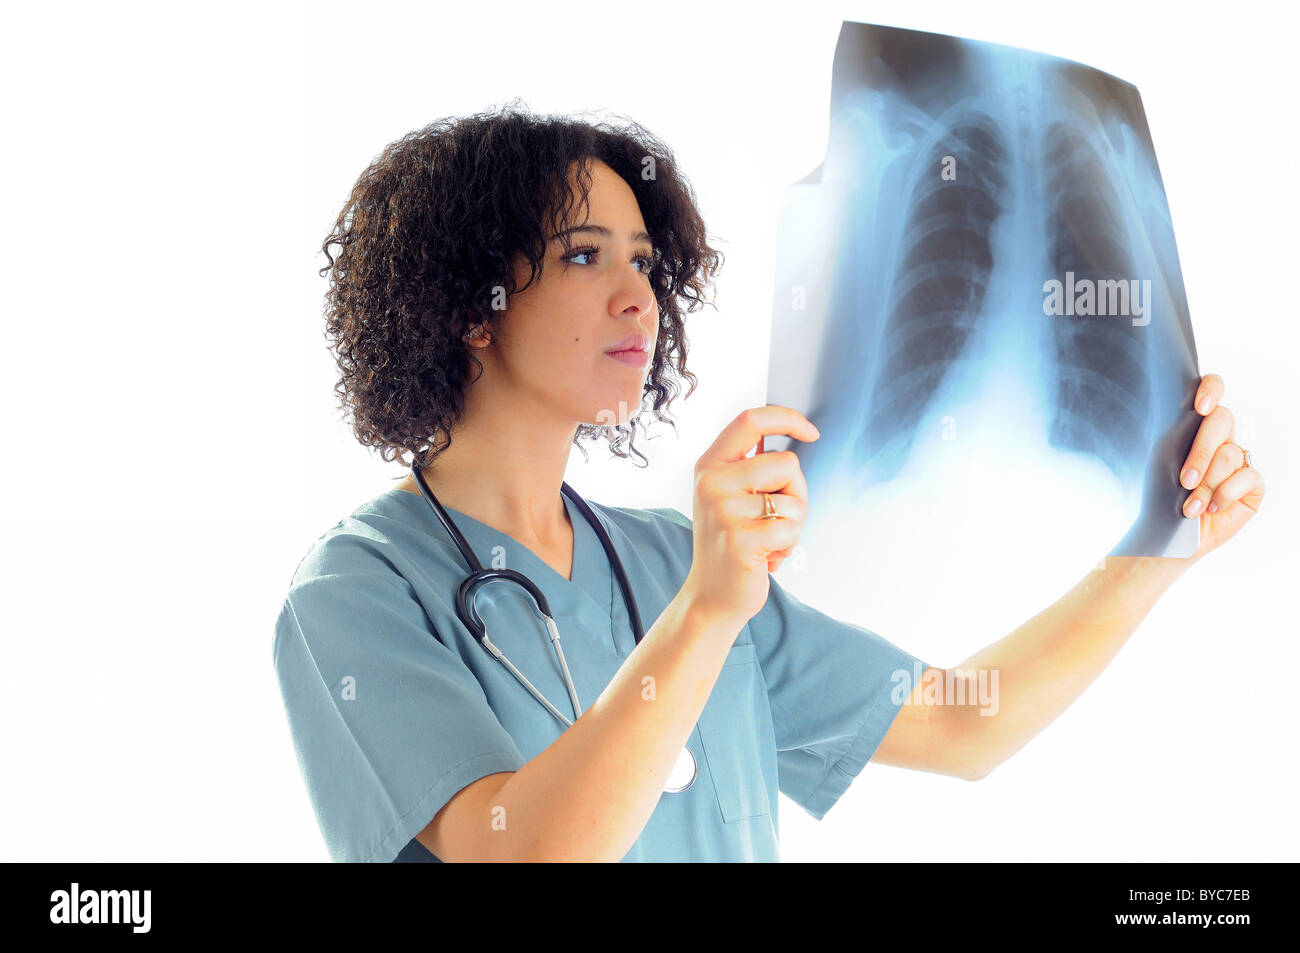 Female Nurse Looking At A Patients Chest X-Ray Stock Photo